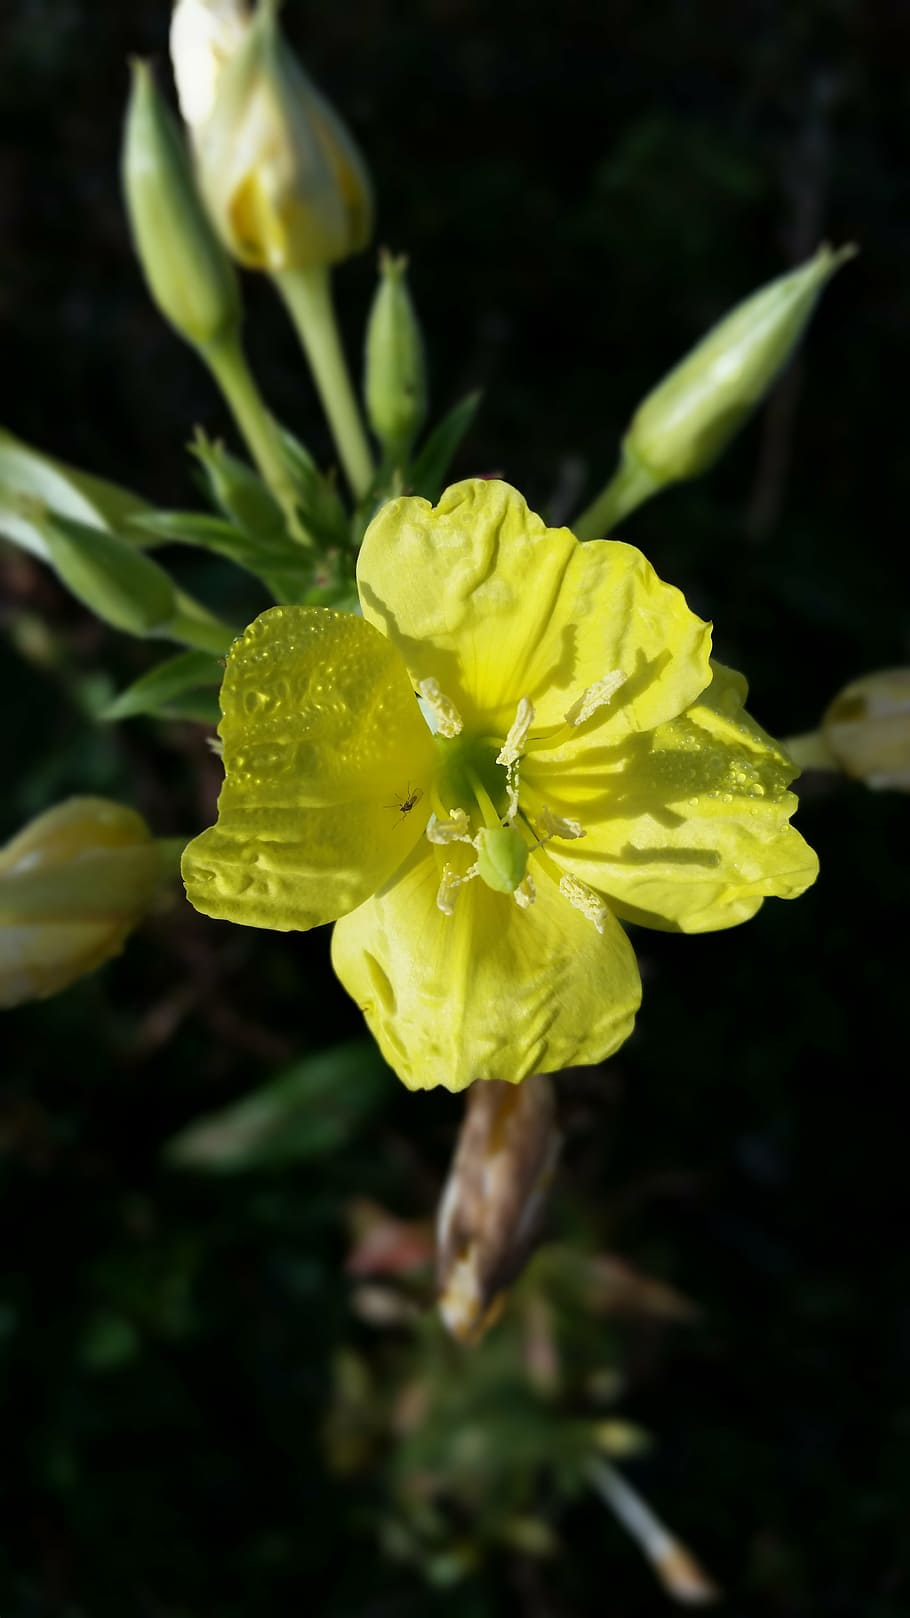 yellow wild flowers, close, nature, small, bloom, 5 petals, plant, herb, flower, fragility